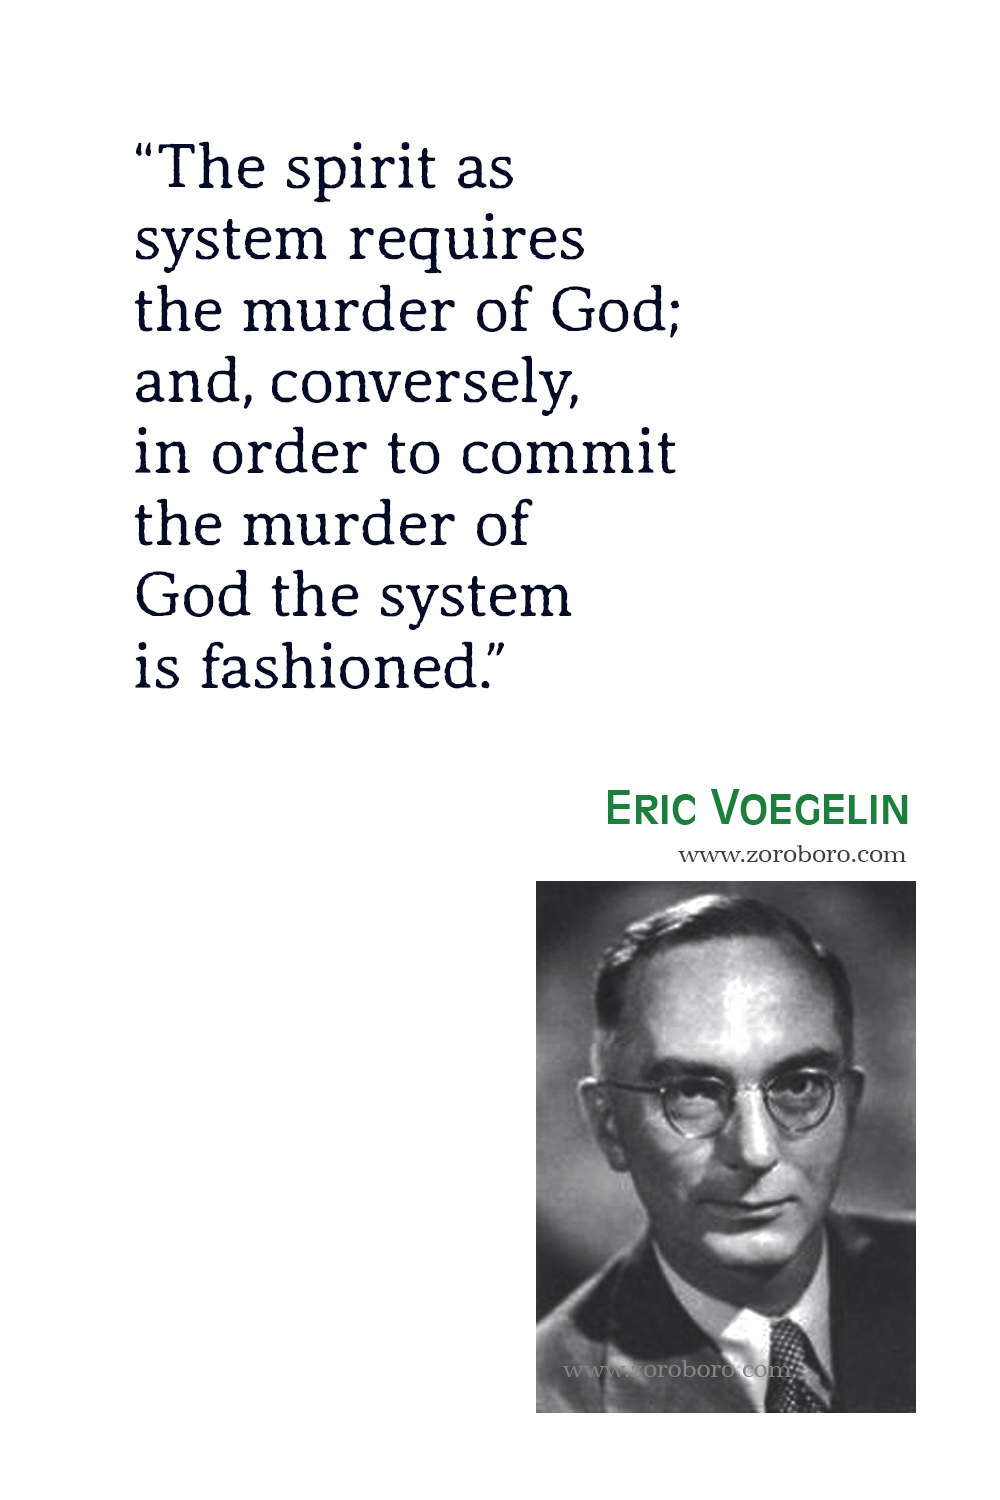 Eric Voegelin Quotes, Eric Voegelin, Science, Politics and Gnosticism: Two Essays, Eric Voegelin Books, Eric Voegelin.